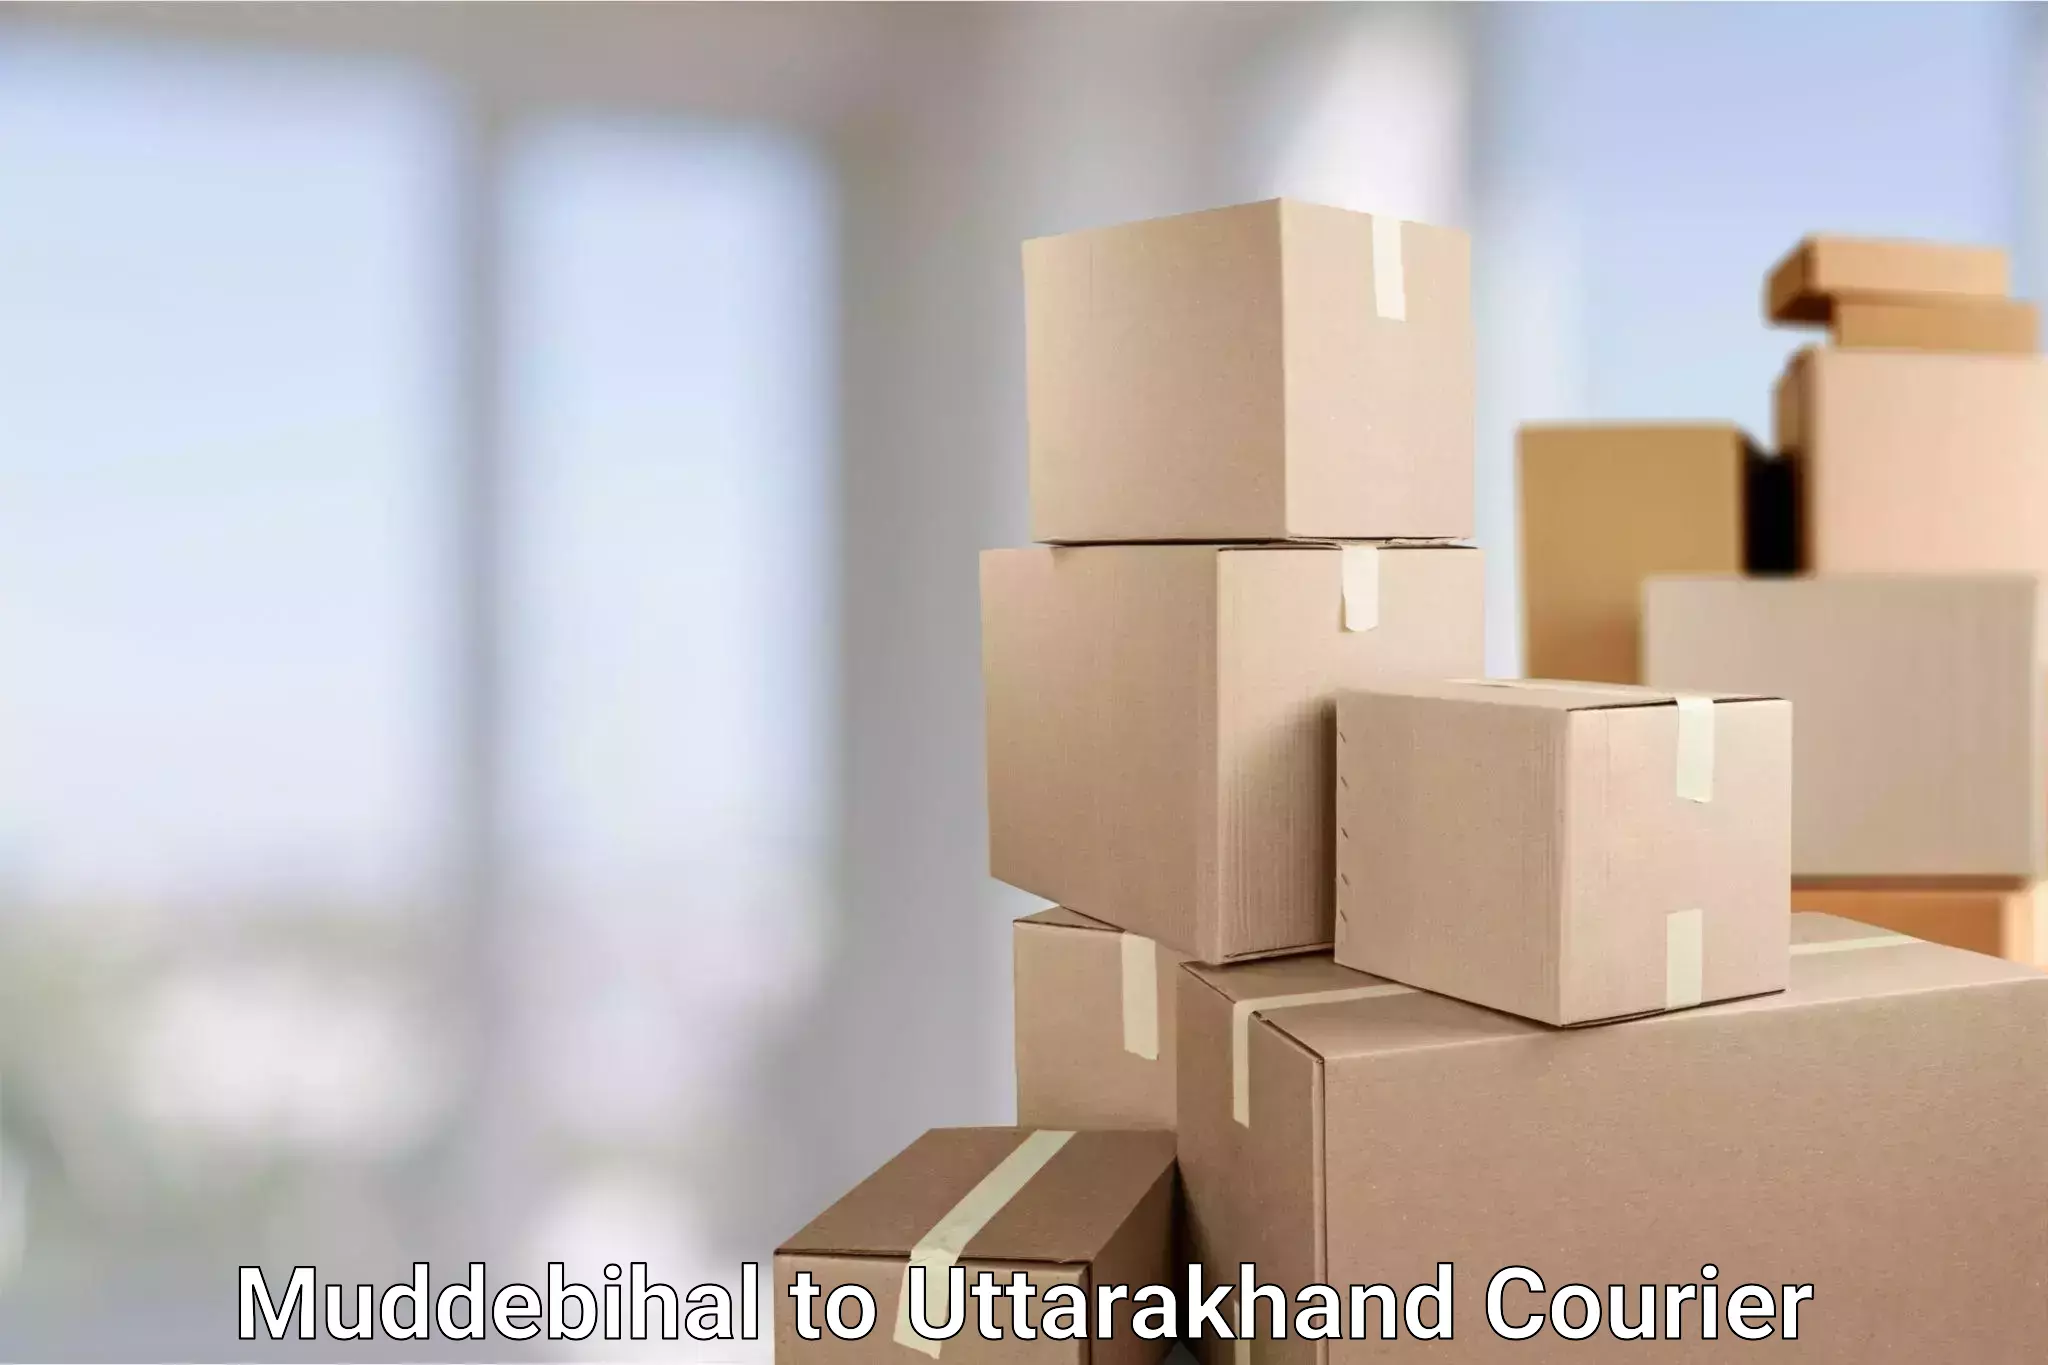 Parcel handling and care Muddebihal to Rishikesh